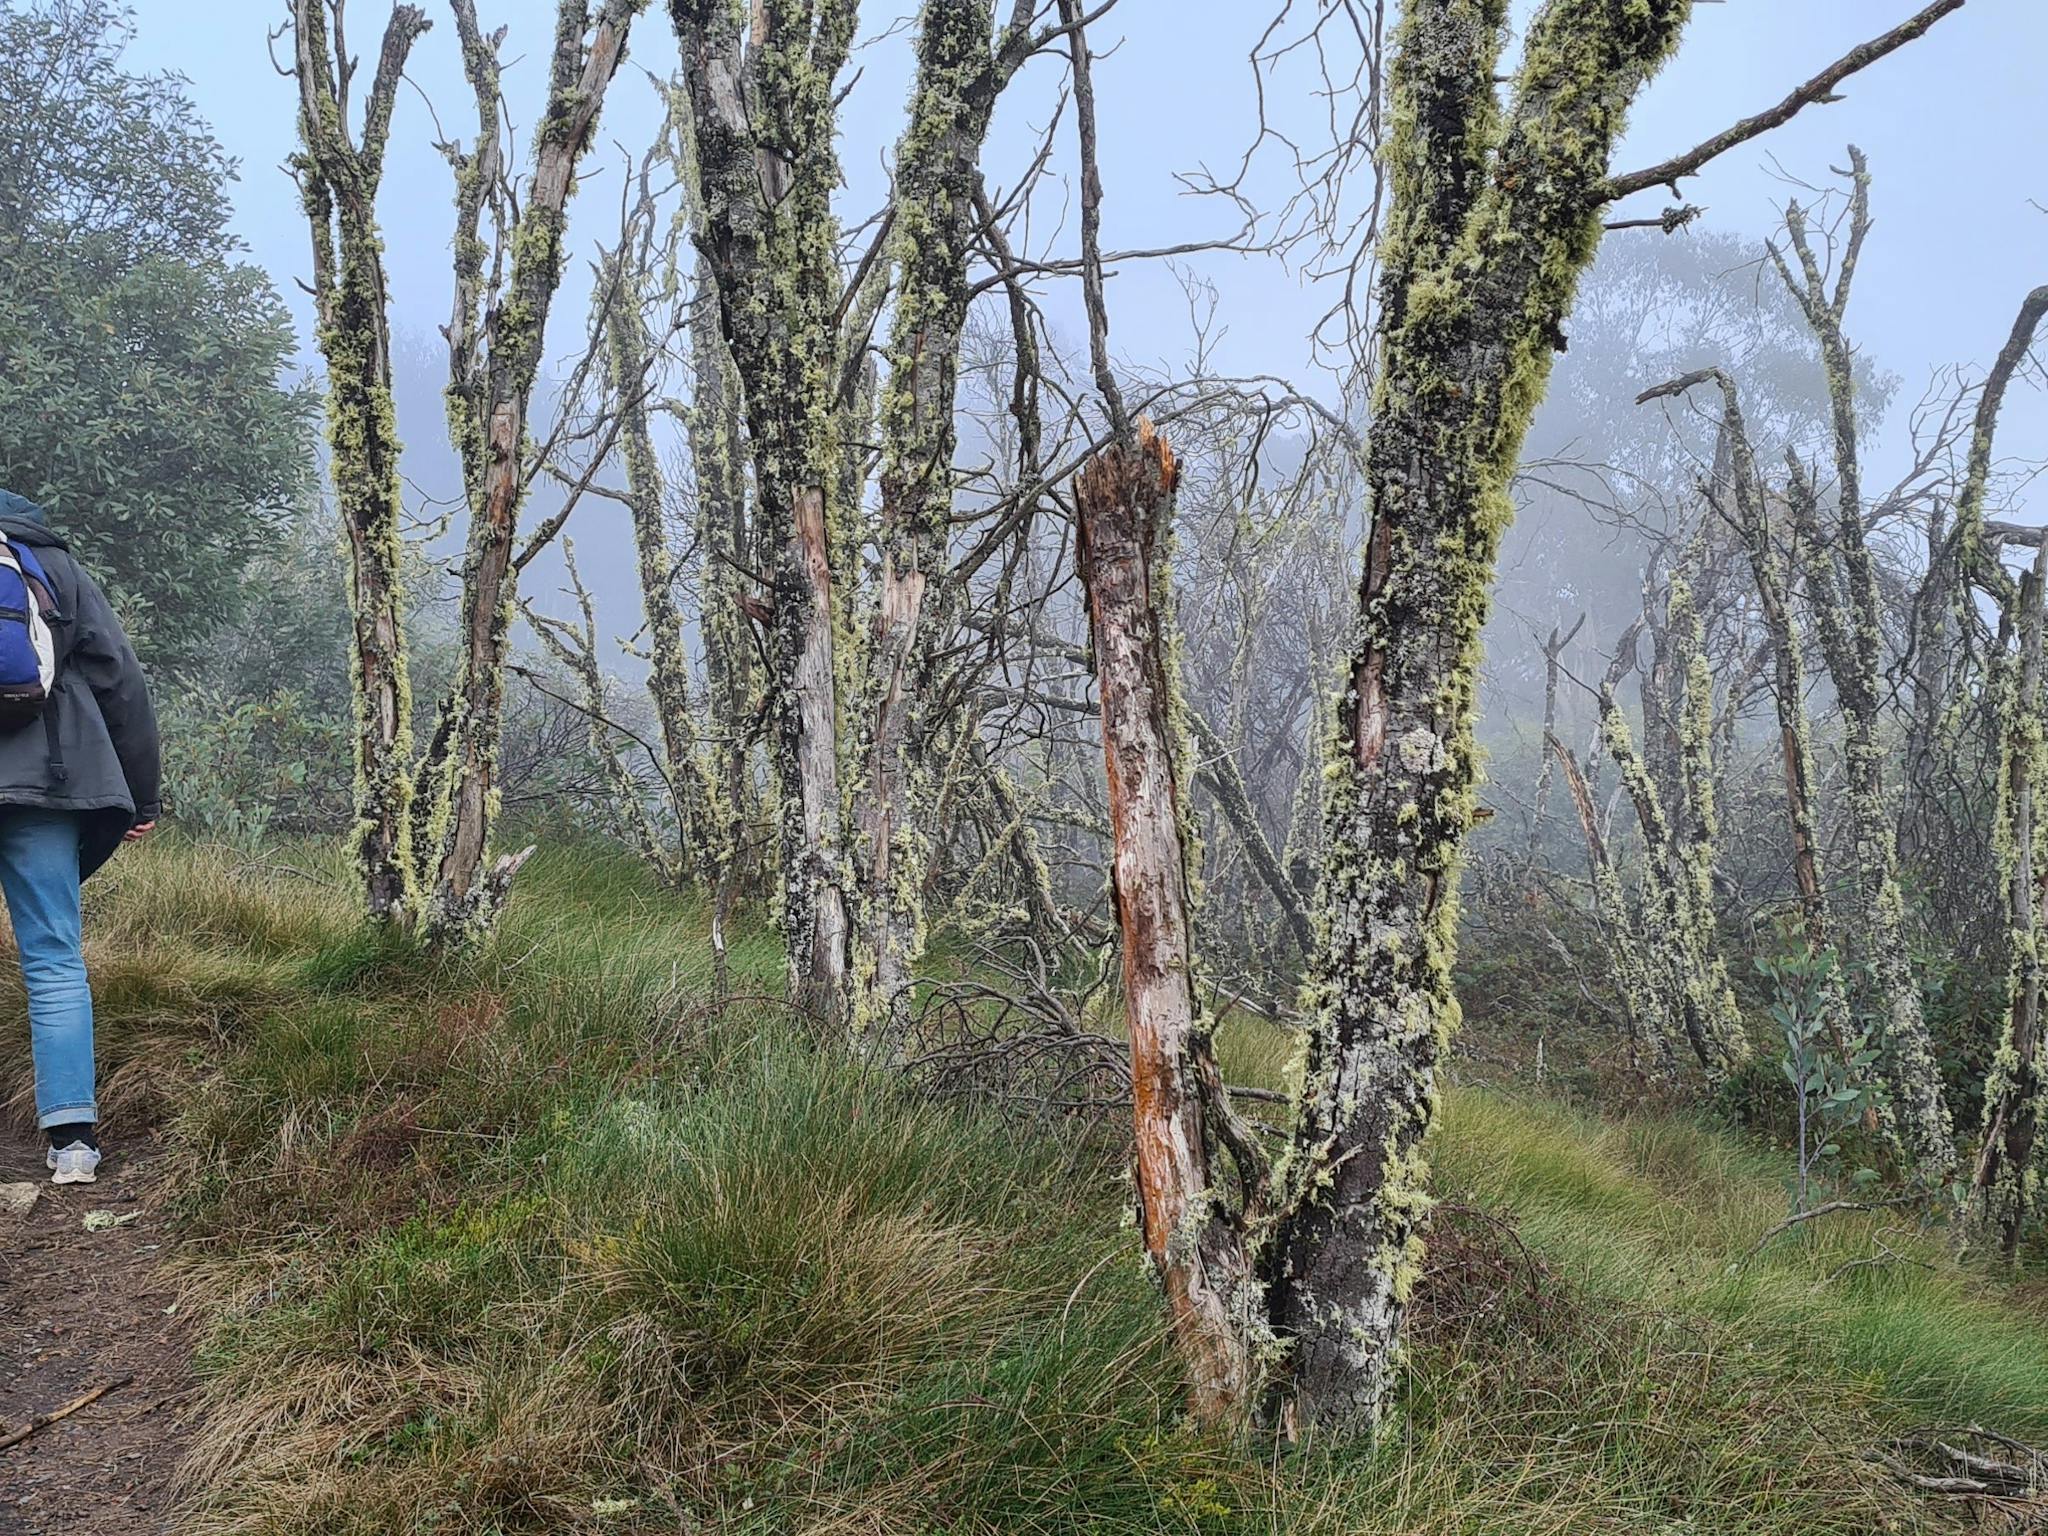 A couple of hikers on the trail to Craig's Hut hiking amongst Snow Gums surrounded by fog.